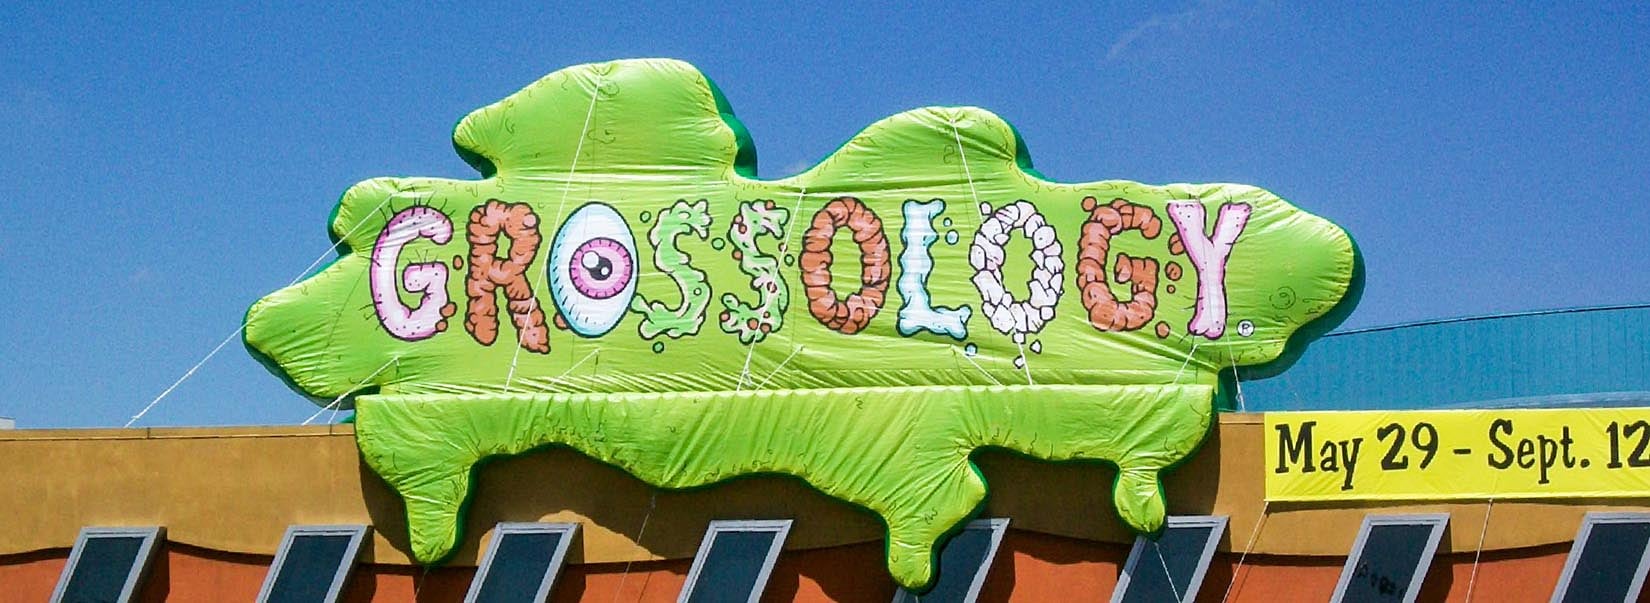 Grossology Science Center Custom Inflatable Sign with custom graphics and print